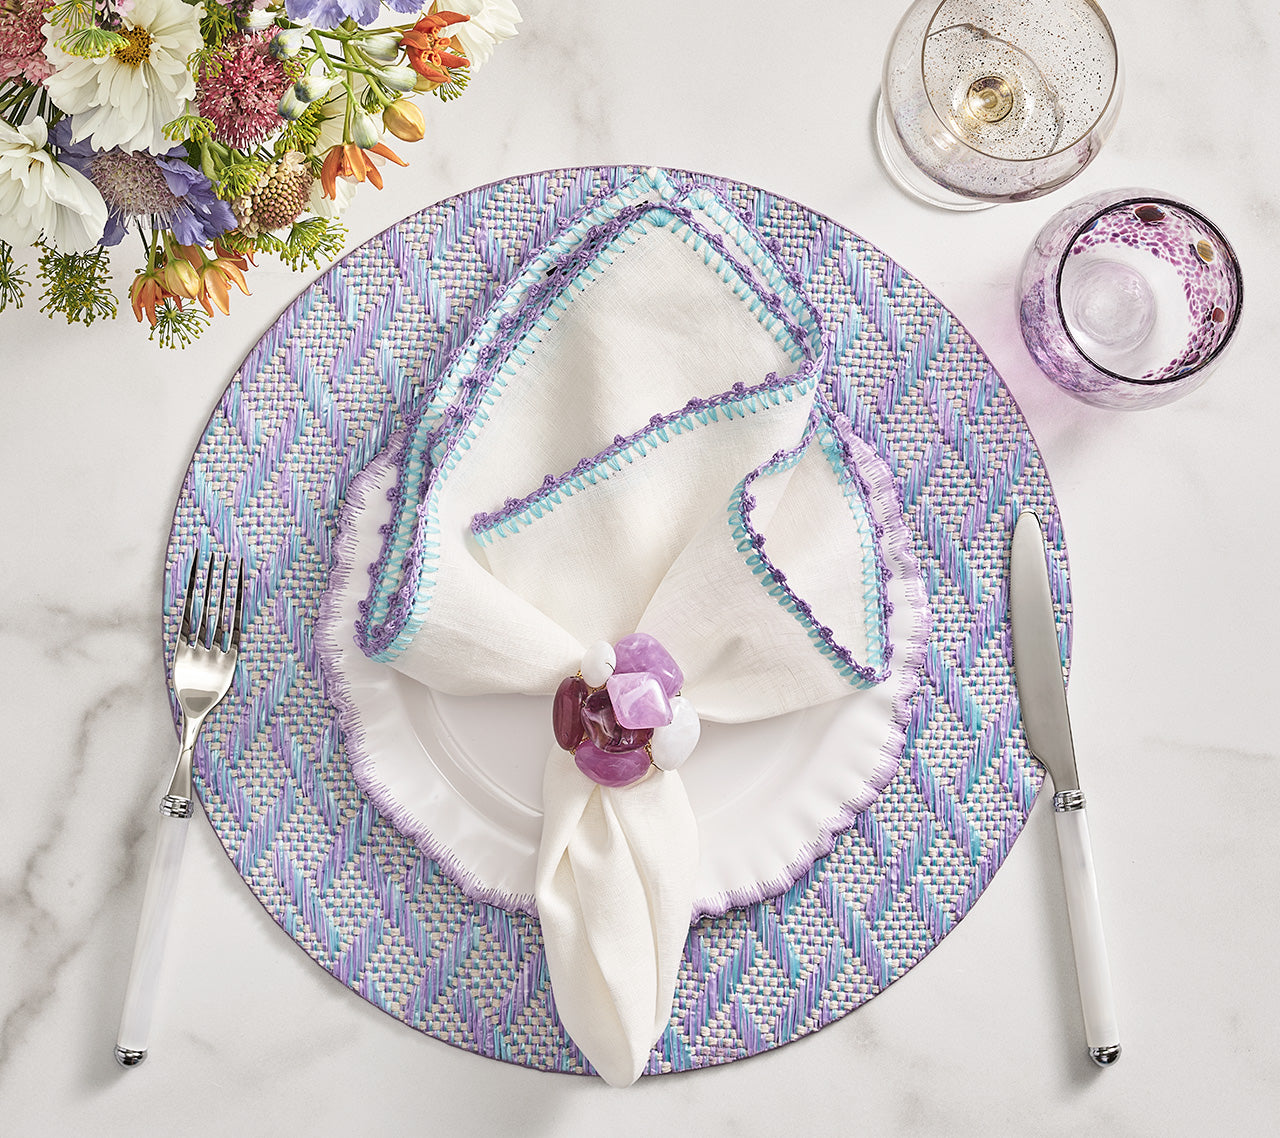 Kim Seybert Luxury Knotted Edge Napkin in White, Lilac & Blue with Herringbone Placemat in Lilac and Seastone Napkin Ring in Lilac